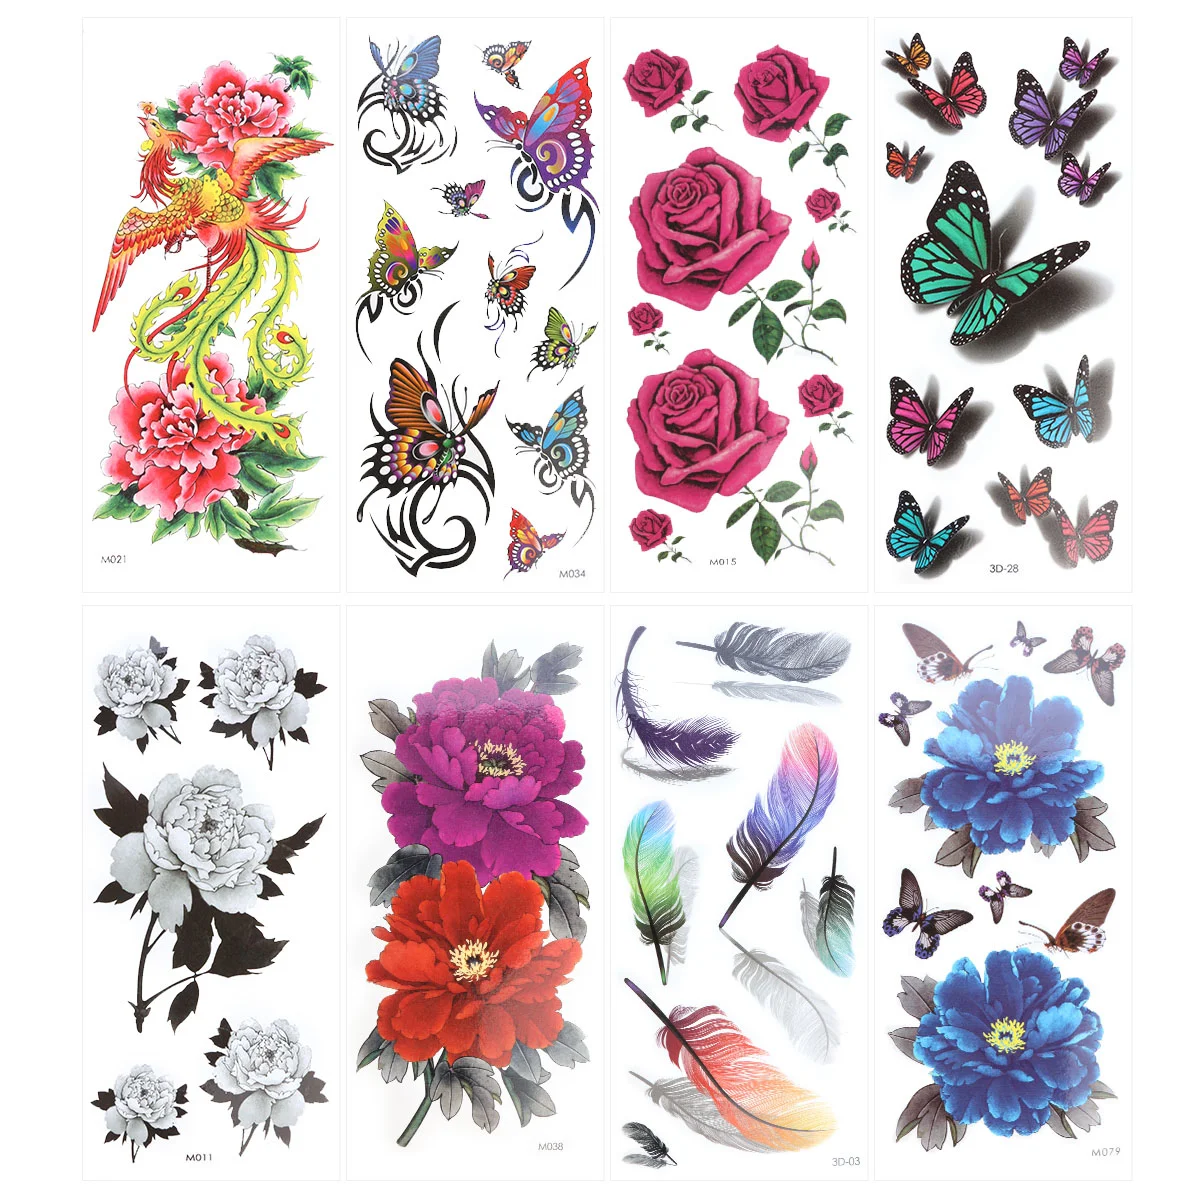 

8 Sheets Temporary Tattoos Adults Temperary Waterproof Sticker Cartoon Stickers Flower Chic